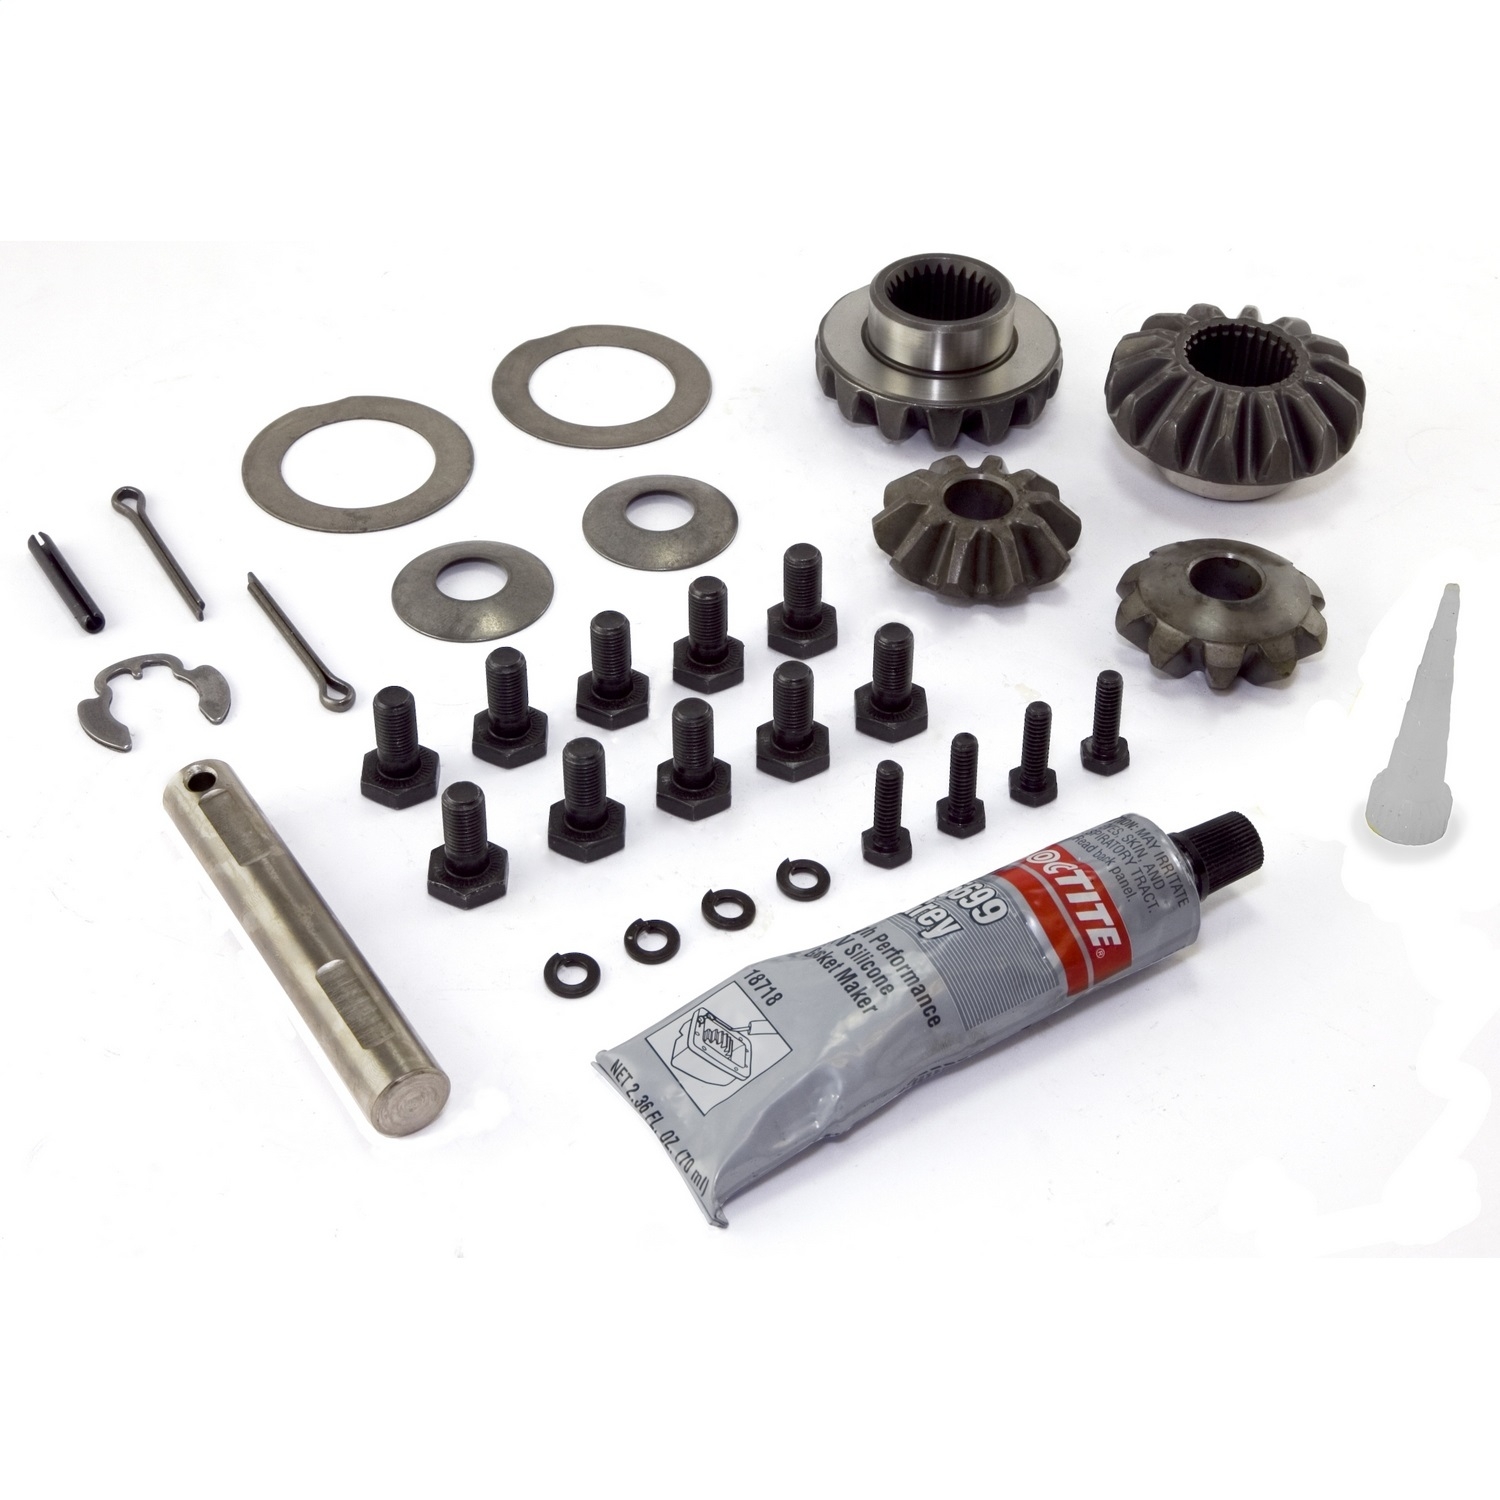 Omix This Spider Gear Kit Fits Standard Dana 30 In 91-01 Jeep Cherokee, 93-98 Grand Cherokee, 90-06